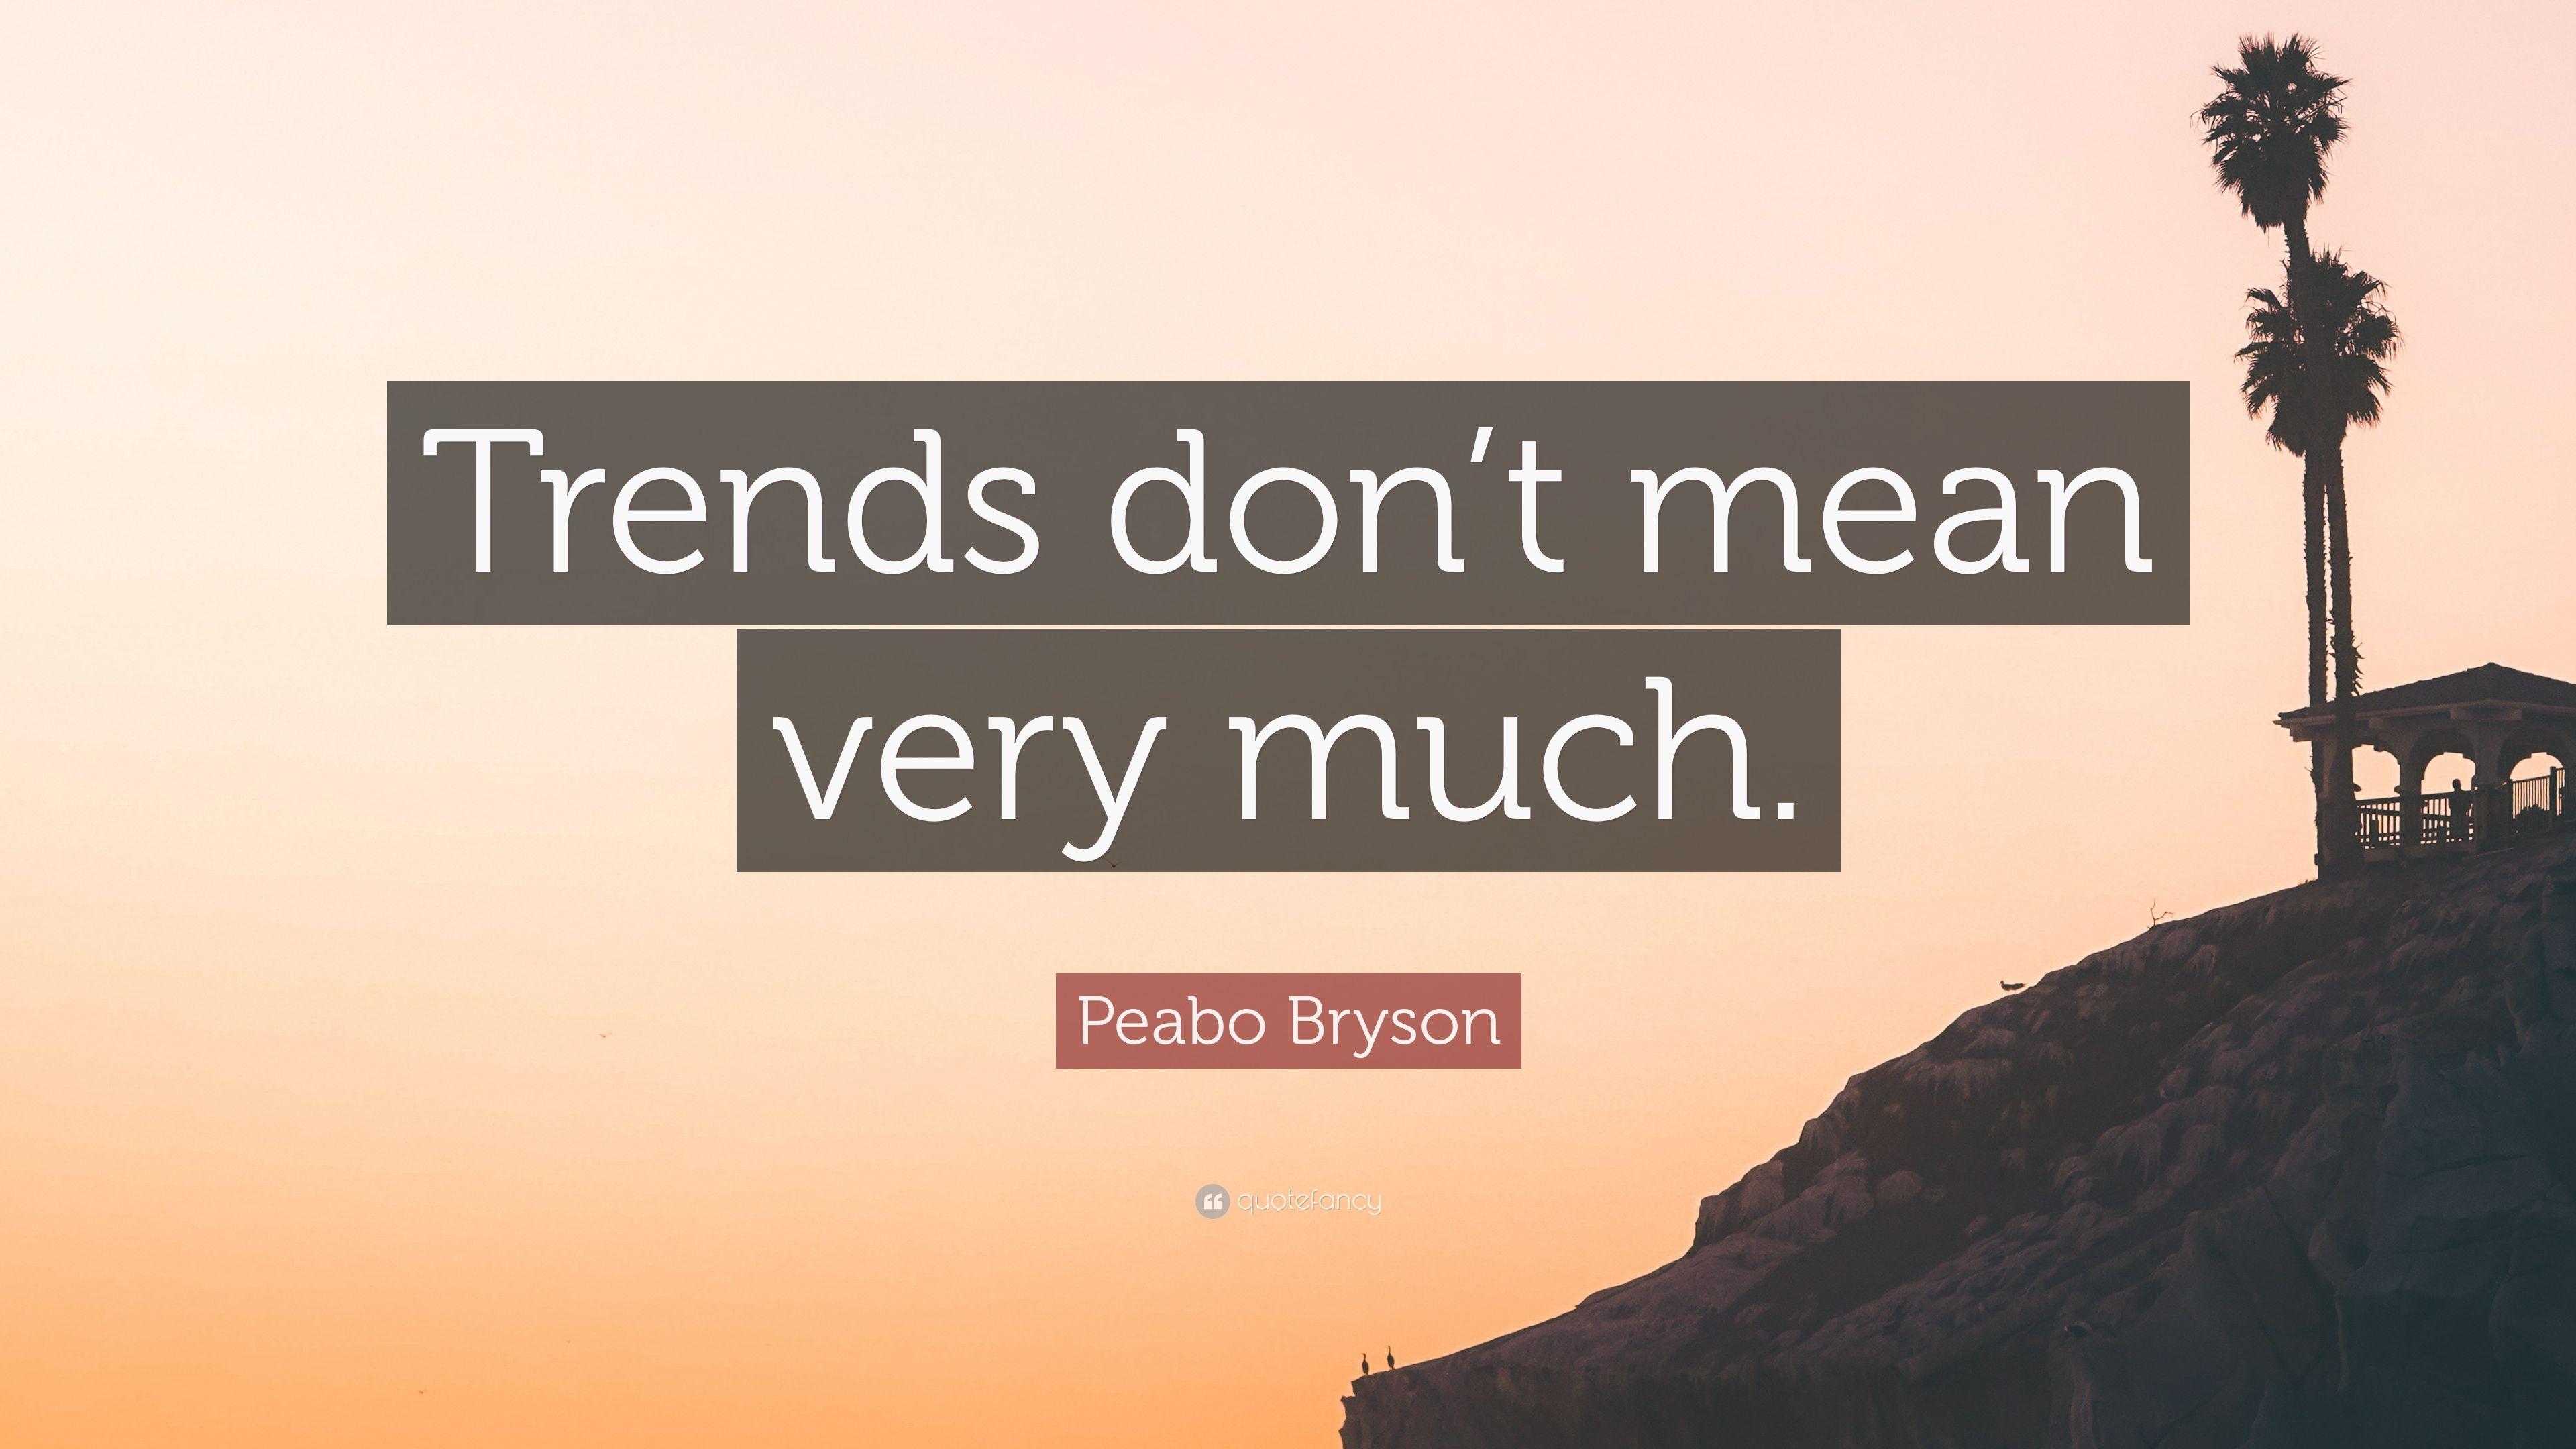 Peabo Bryson Quote: “Trends don't mean very much.” 7 wallpaper